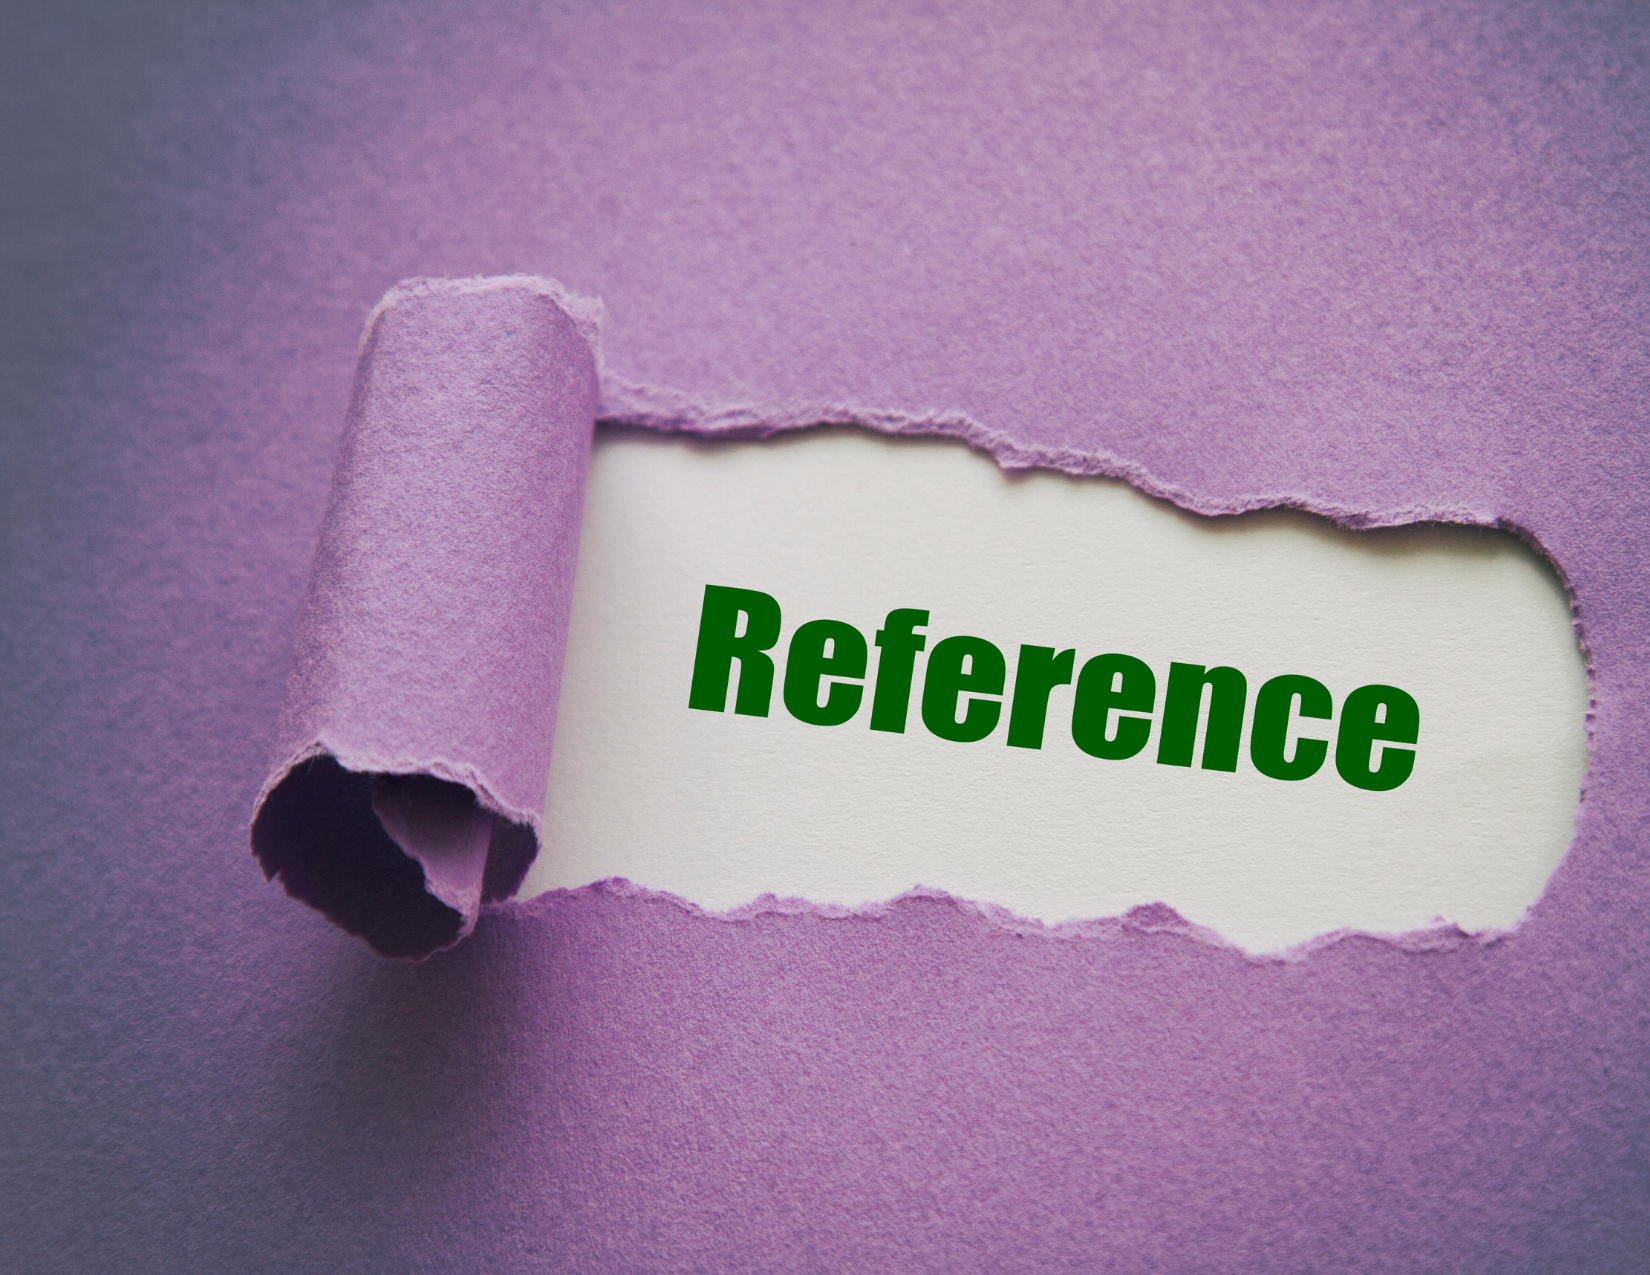 The word "reference"